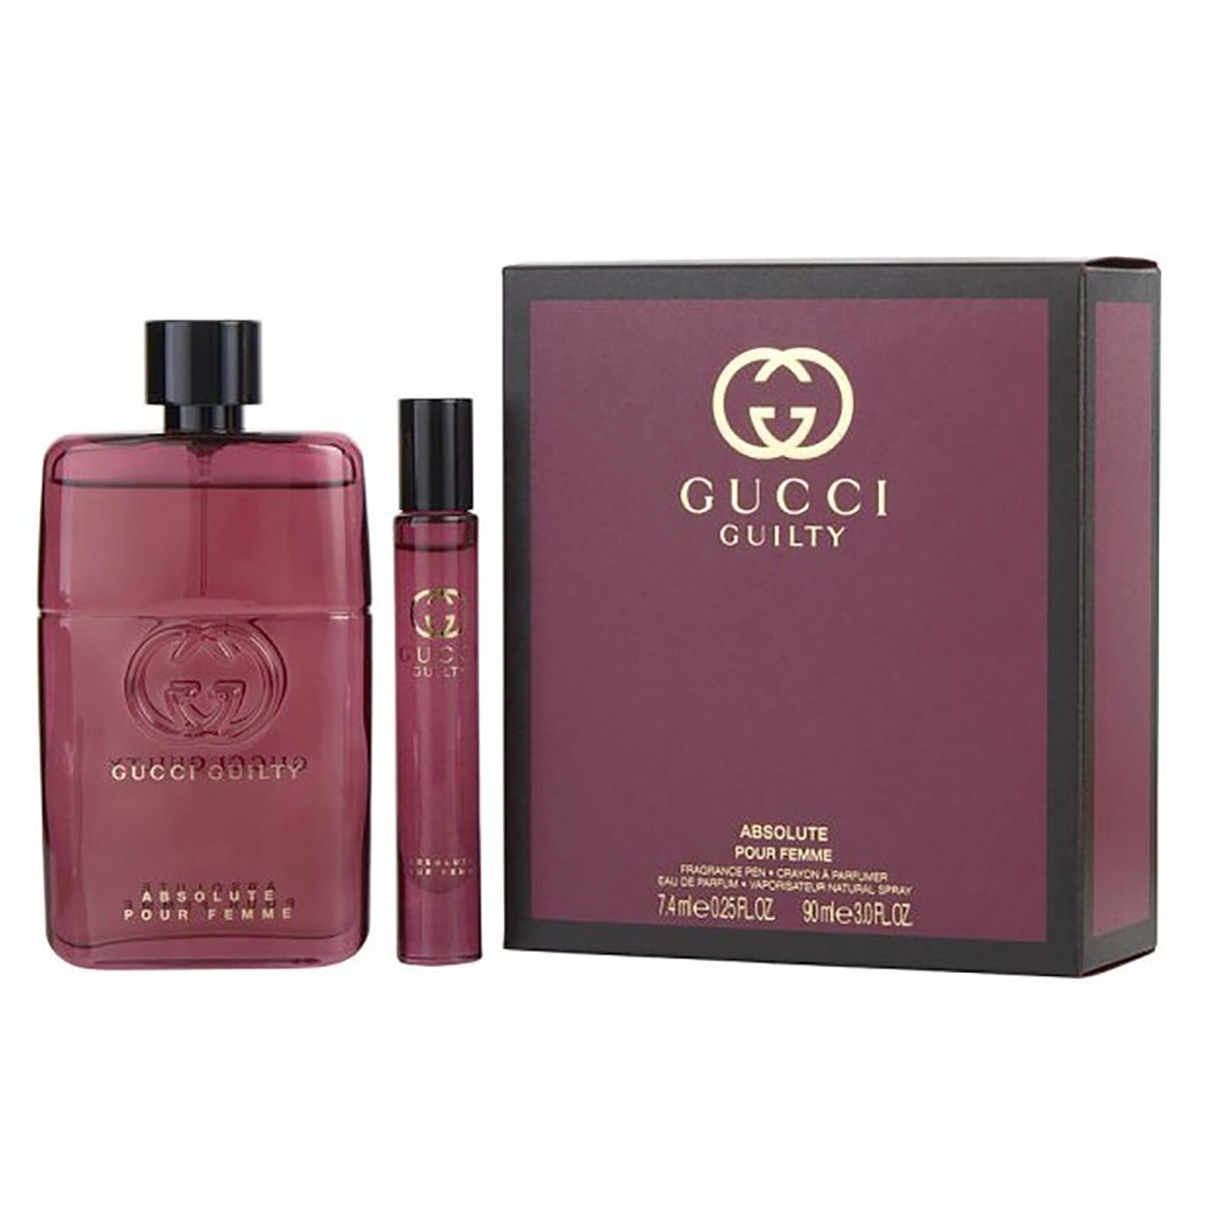 Gucci guilty absolute pour. Gucci guilty absolute pour femme EDP 50ml. Gucci guilty absolute pour femme,90 мл. Гуччи guilty absolute pour femme. Gucci Gucci guilty absolute pour homme.